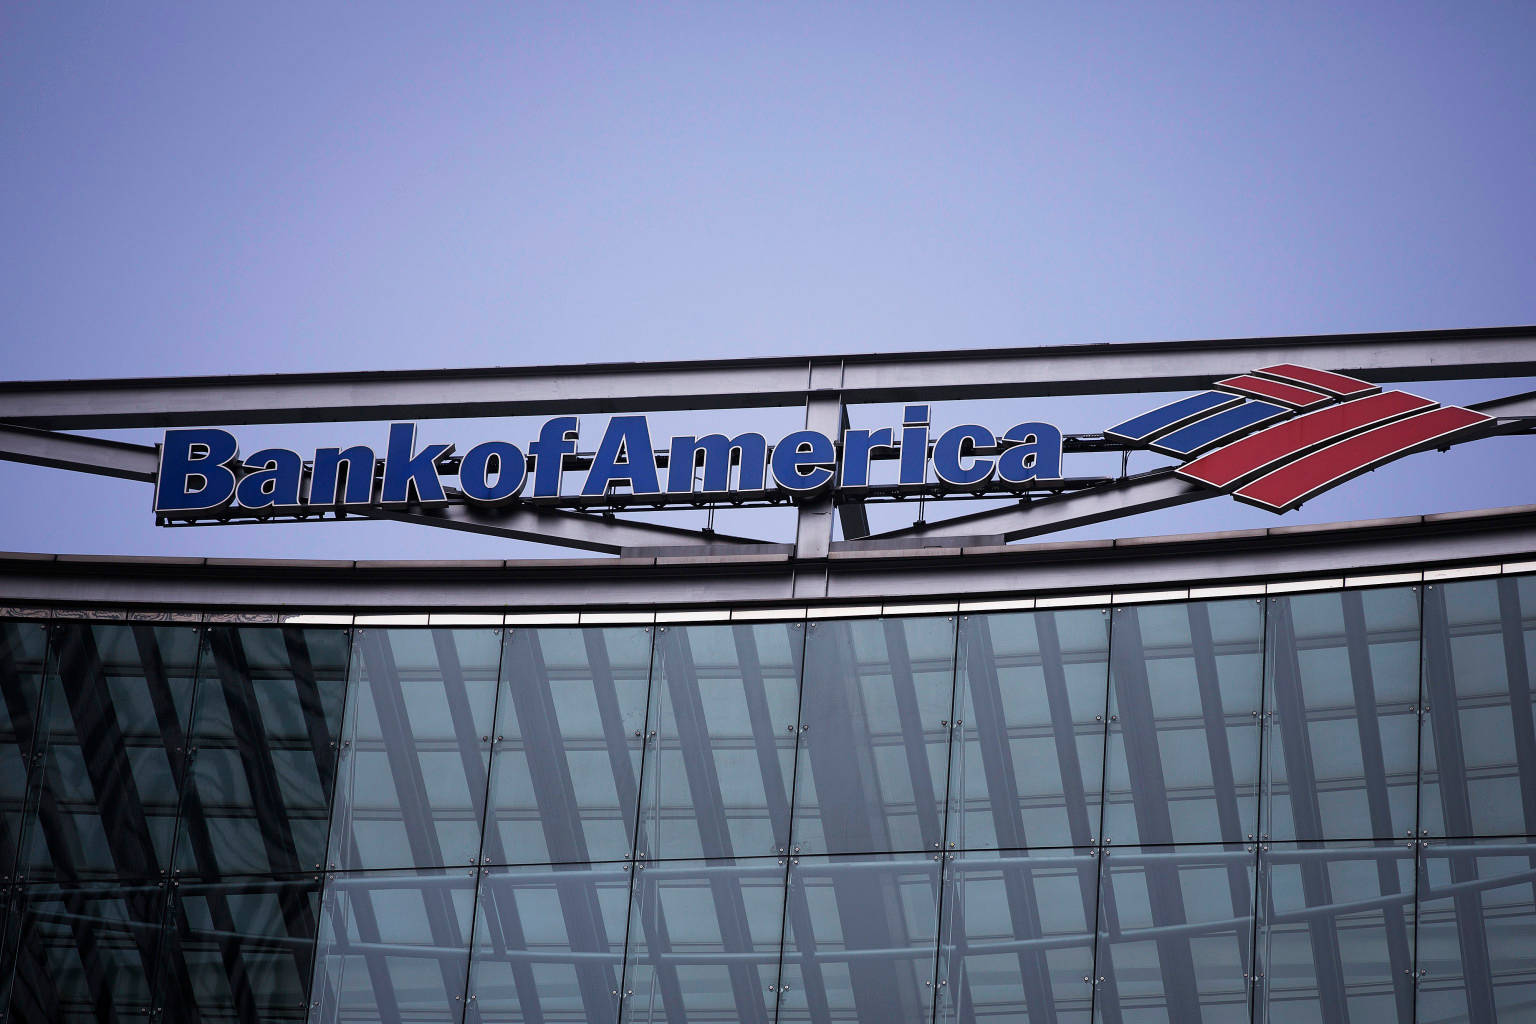 Bank Of America Roof Lettering Signage Picture